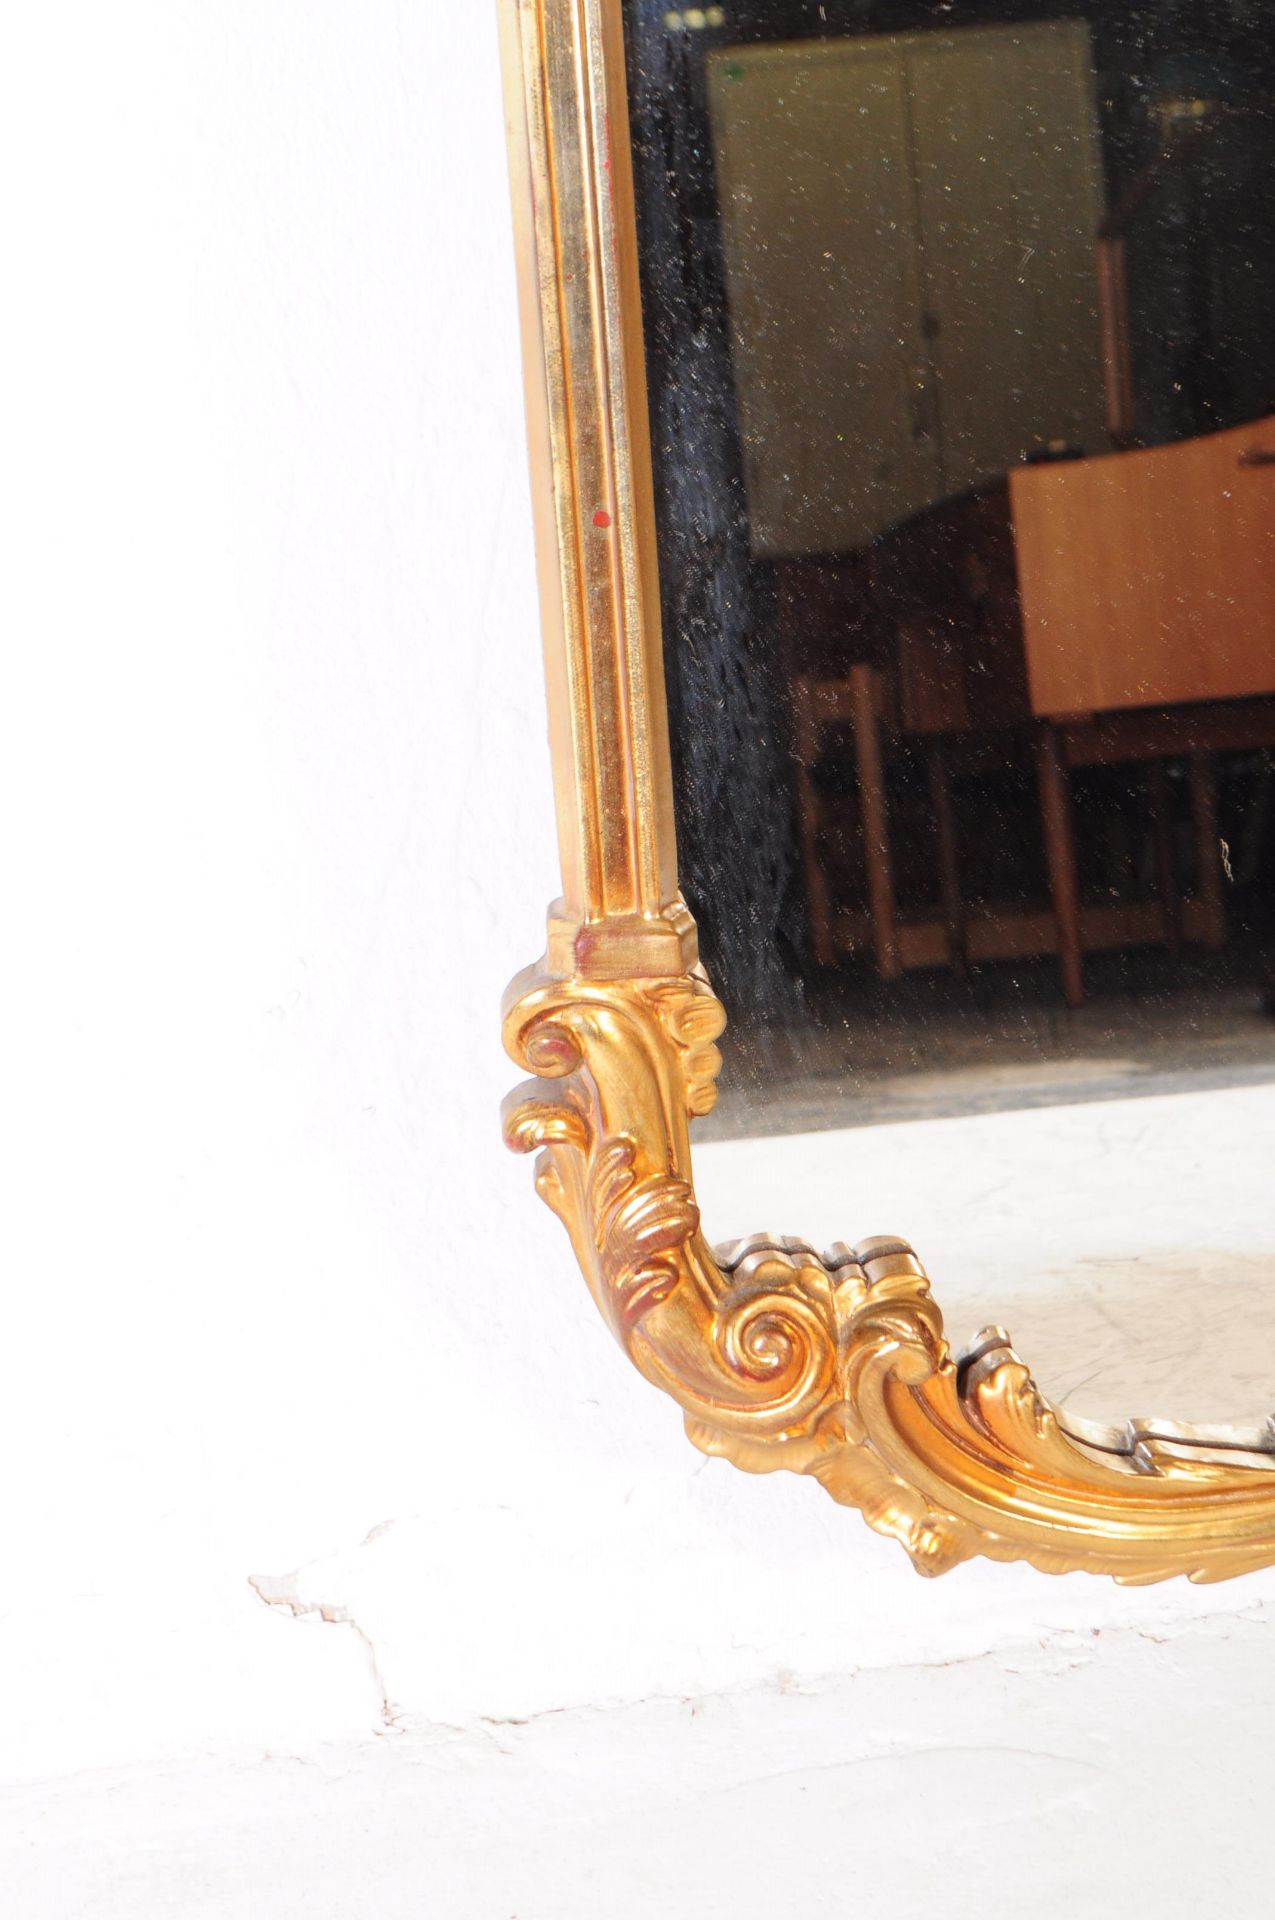 CONTEMPORARY 18TH CENTURY FRENCH STYLE GILT WALL MIRROR - Image 3 of 4